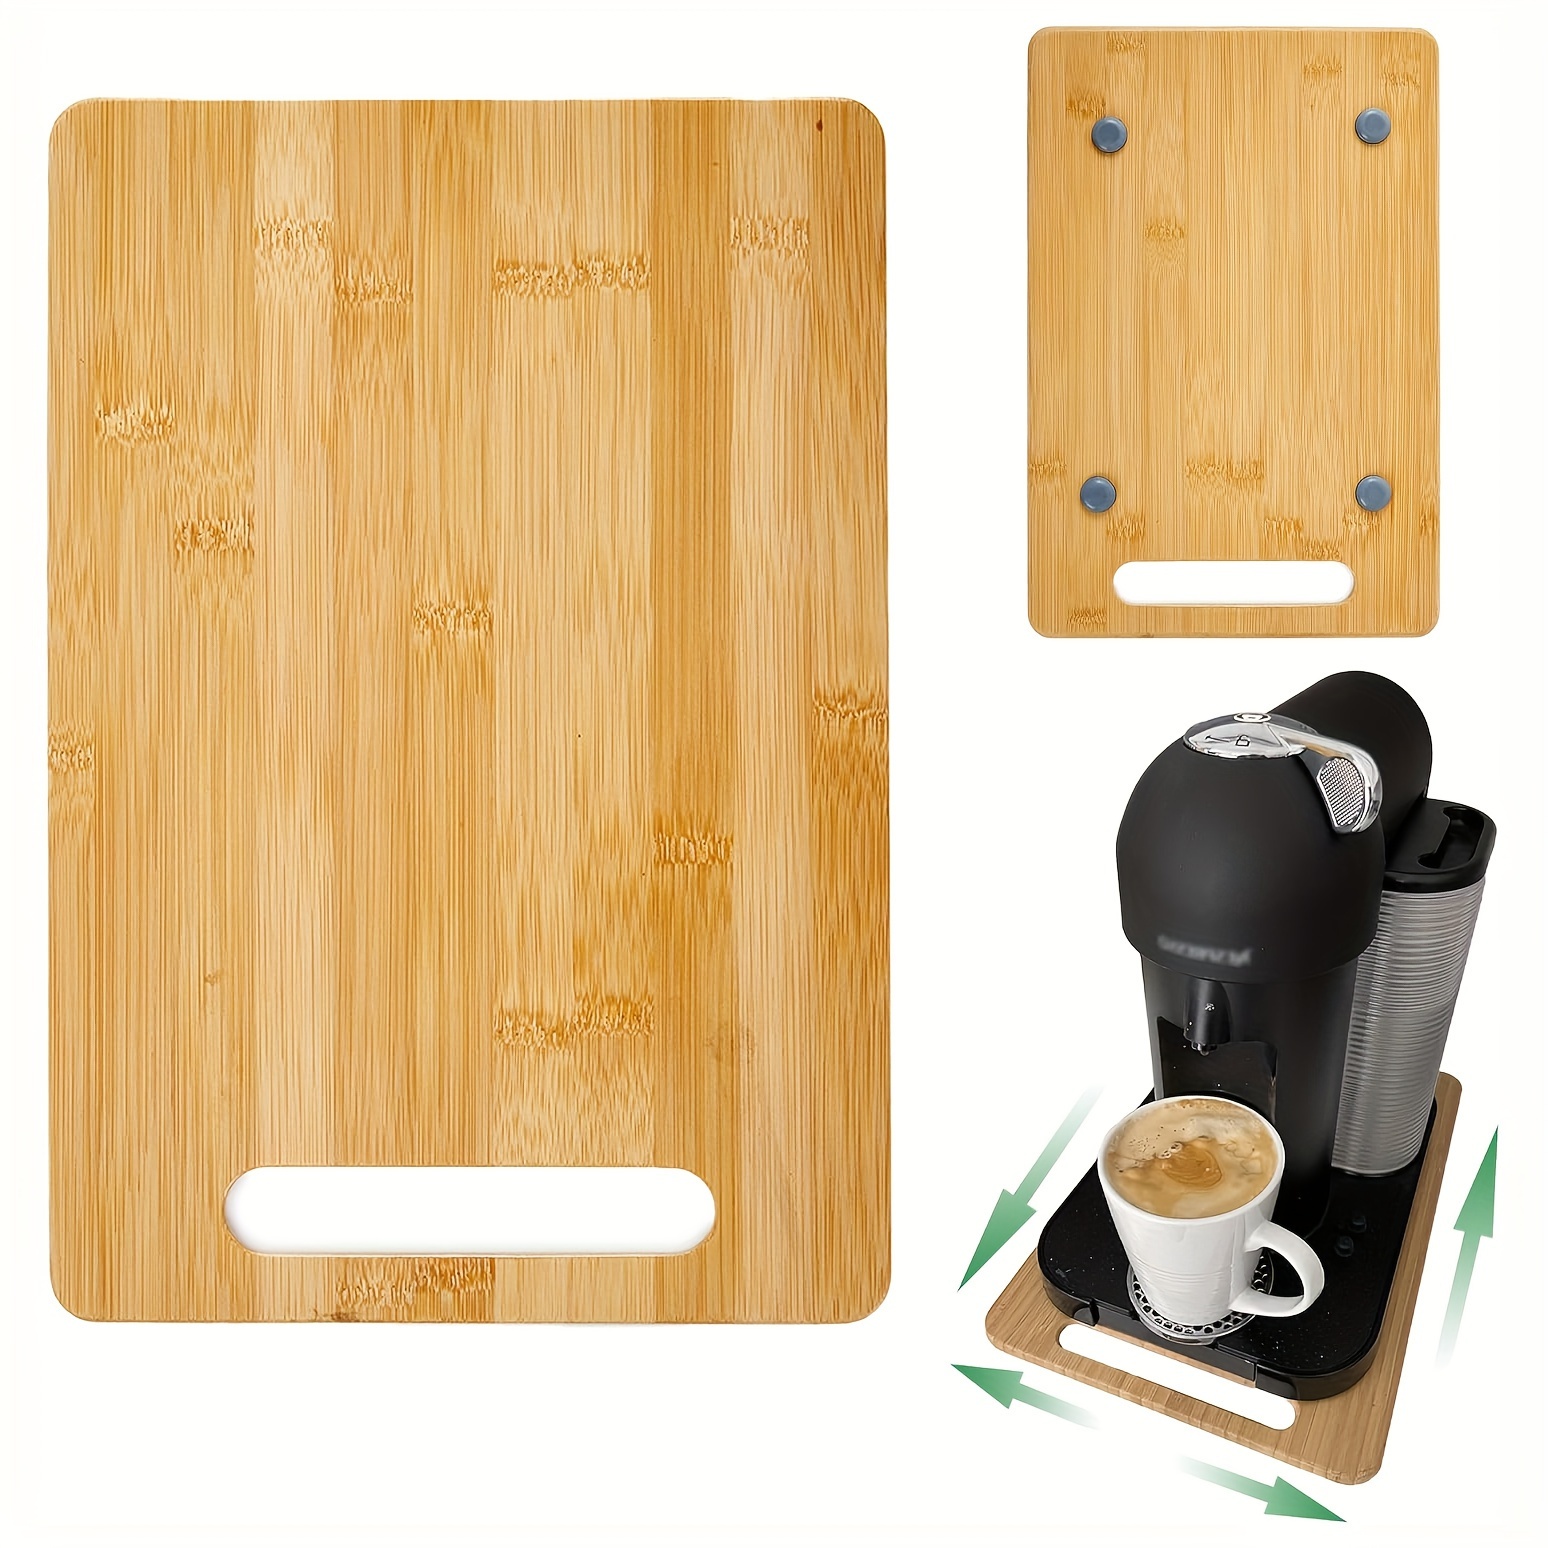 1pc, Appliance Slider Sliding Tray, Kitchen Bamboo Appliance Slider,  Sliding Tray For Coffee Maker, Mixer, Toaster, Kitchen Countertop Appliance  Rolling Tray, Coffee Pot Slider Tray With Wheels, Today's Best Daily Deals